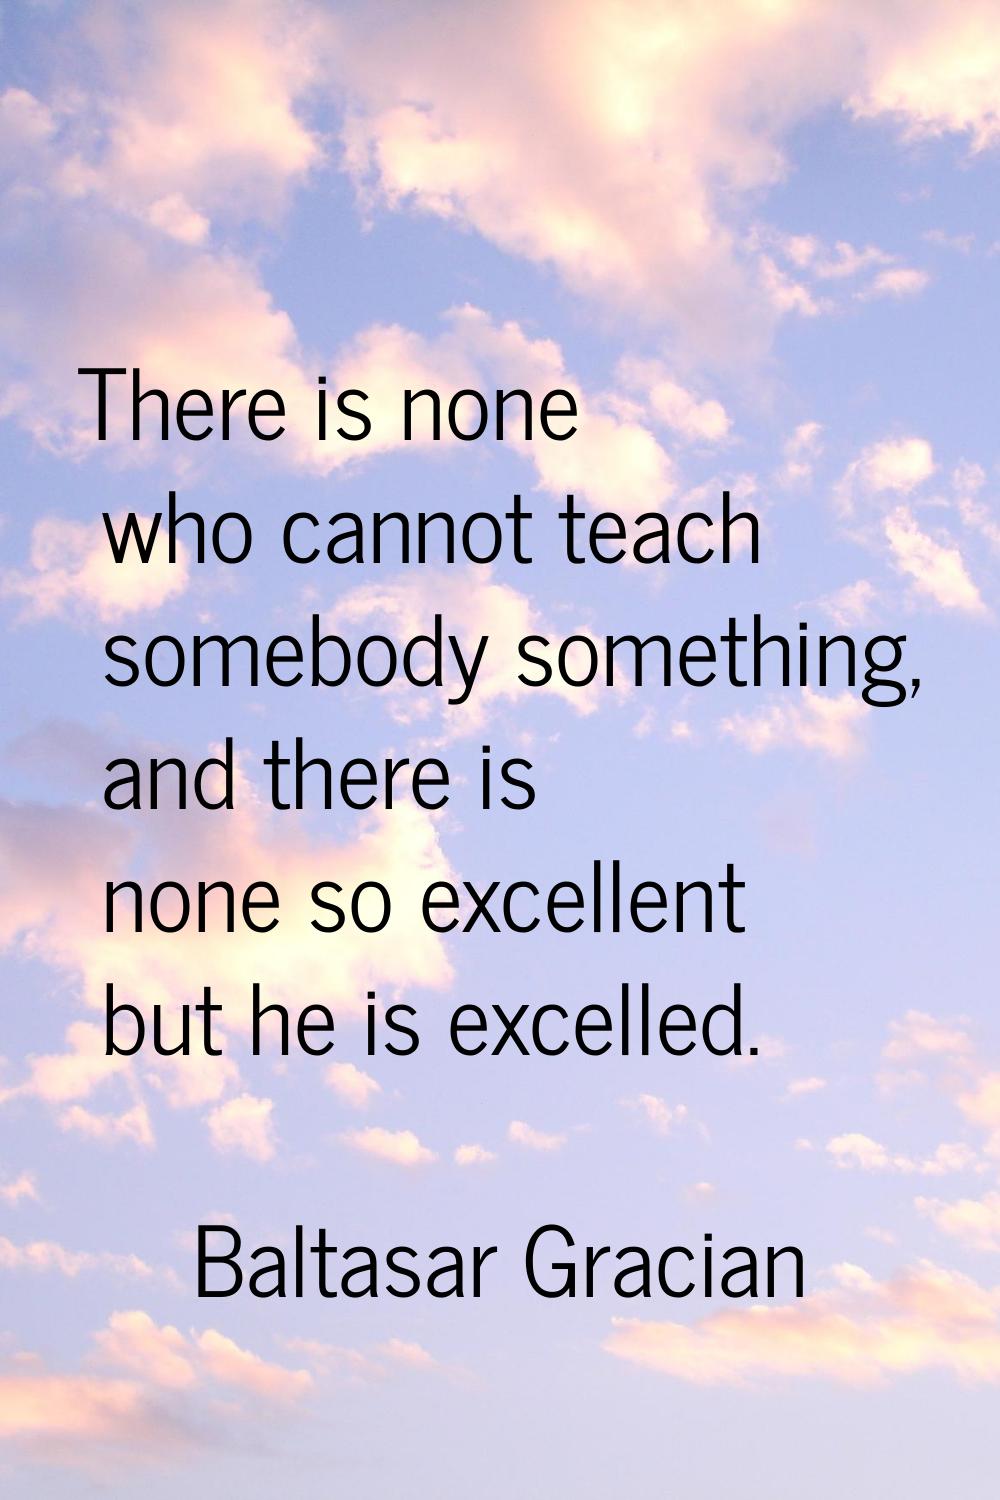 There is none who cannot teach somebody something, and there is none so excellent but he is excelle